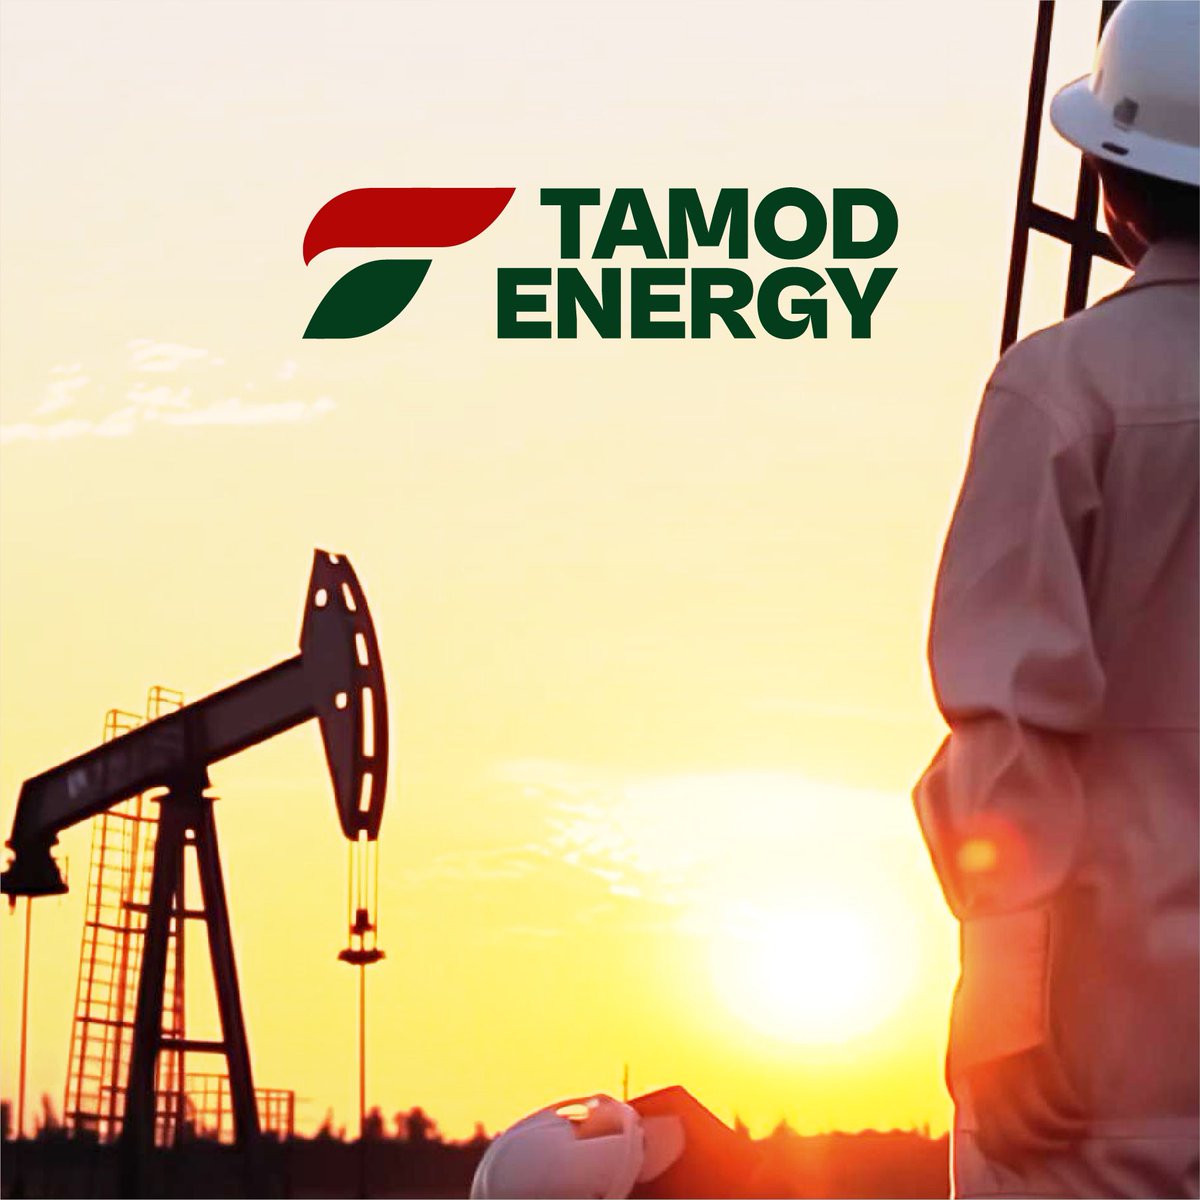 Fueling the future with passion and precision. Welcome to Tamod Energy's journey towards energy excellence. #TamodEnergy #PoweringProgress